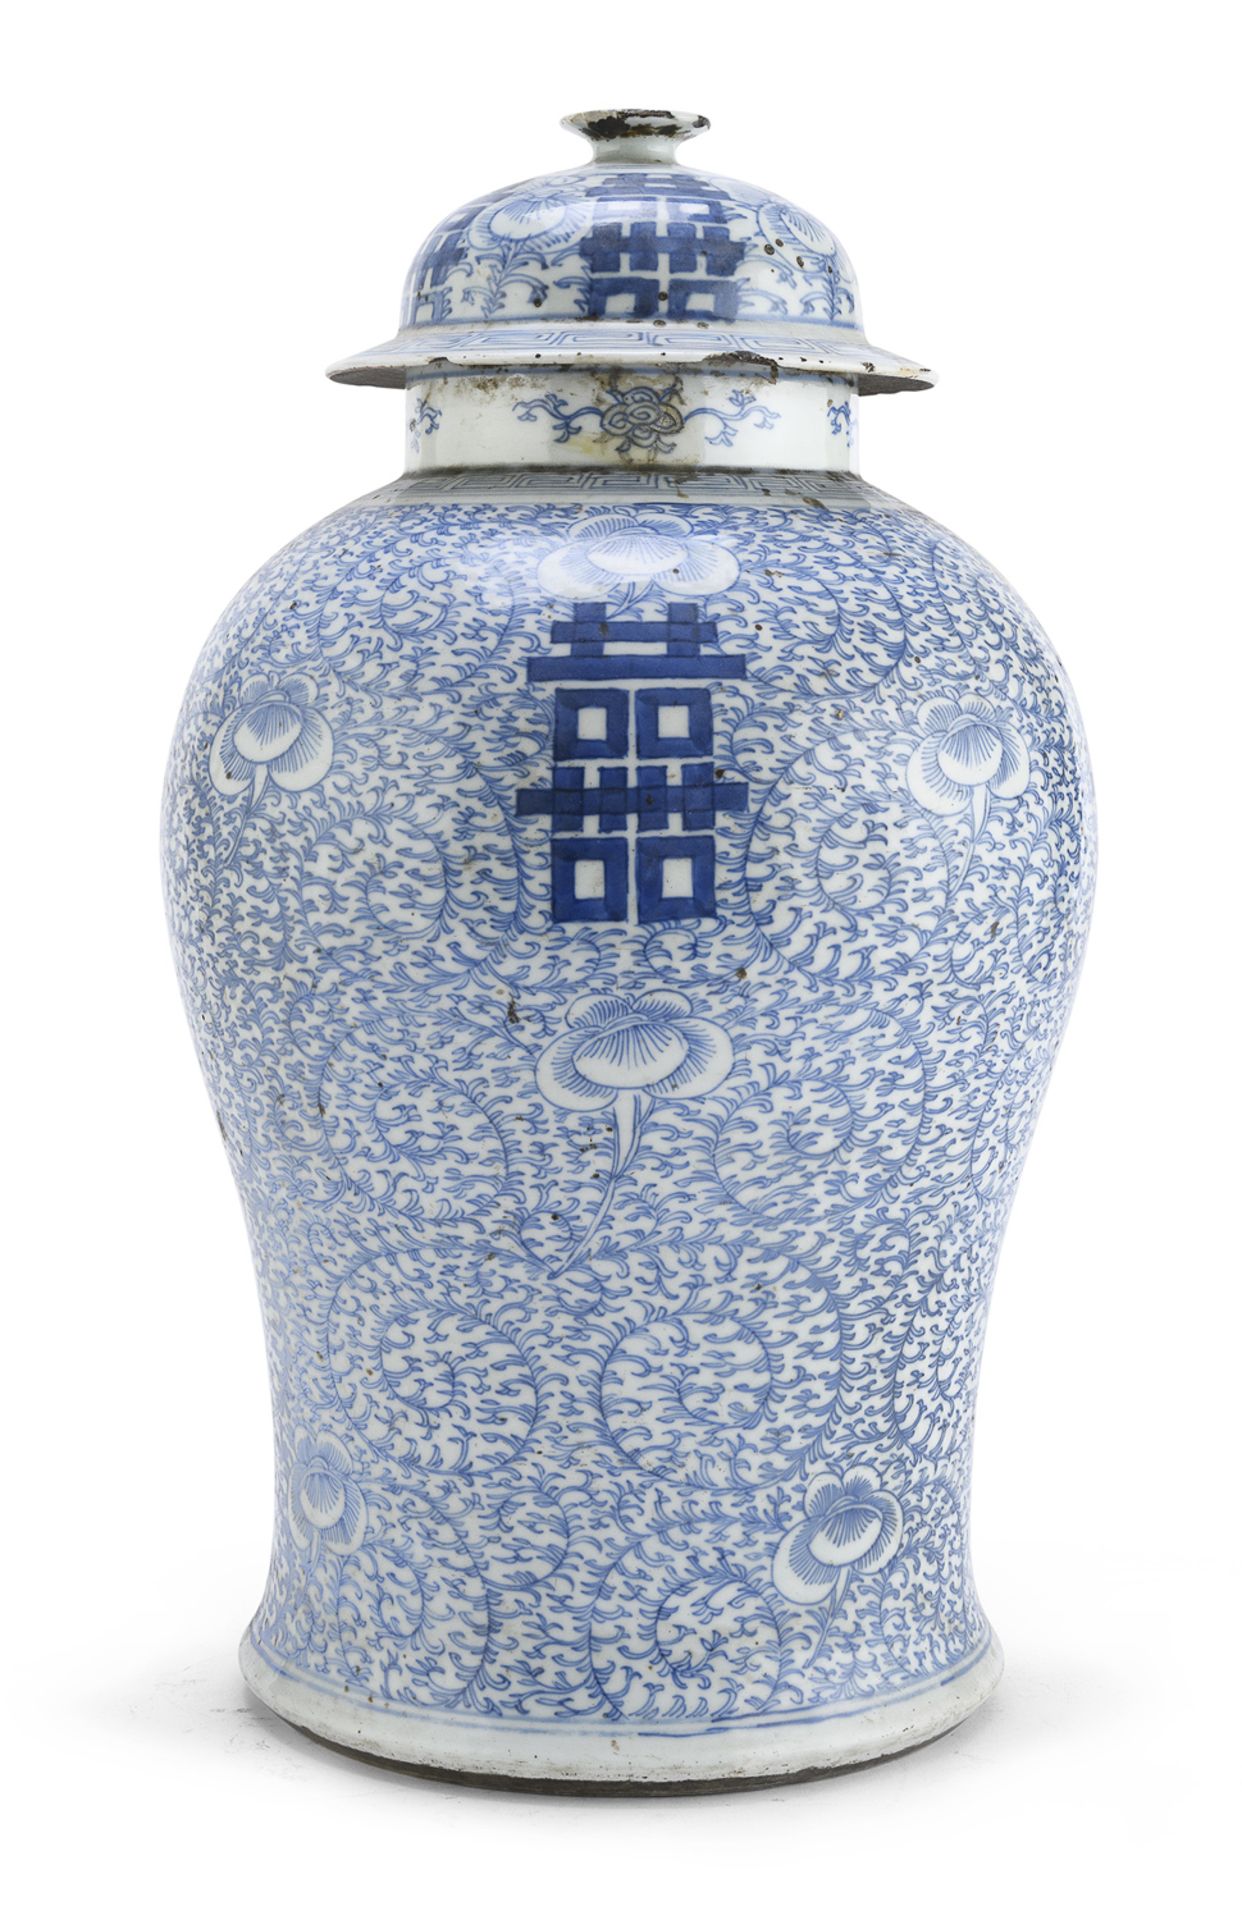 A CHINESE WHITE AND BLUE LIDDED PORCELAIN JAR EARLY 20TH CENTURY. CHIPS TO THE LID.